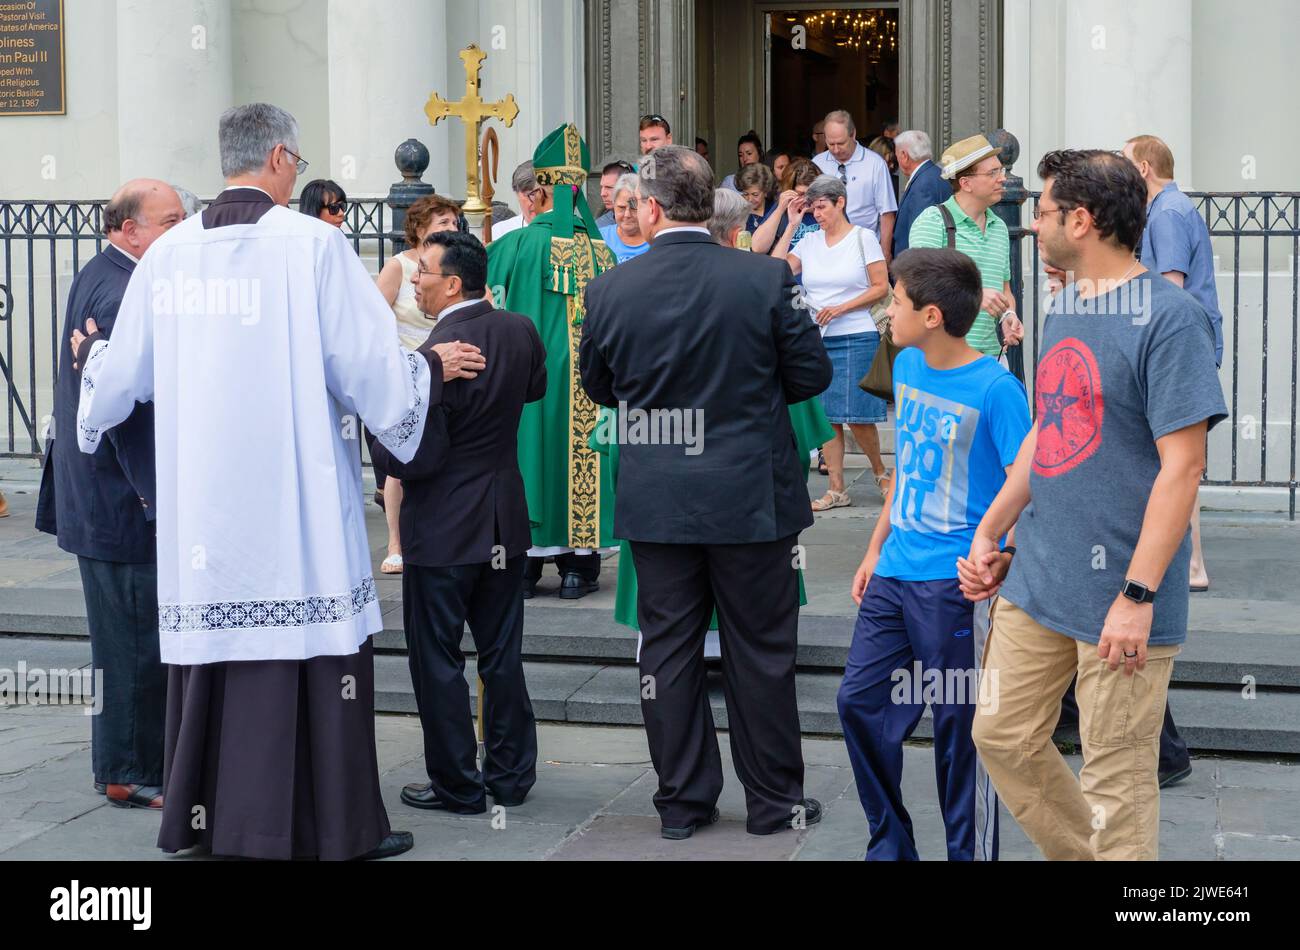 NEW ORLEANS, LA, USA - JULY 16, 2017: Bishop greets parishioners after mass outside St. Louis Cathedral in the French Quarter Stock Photo